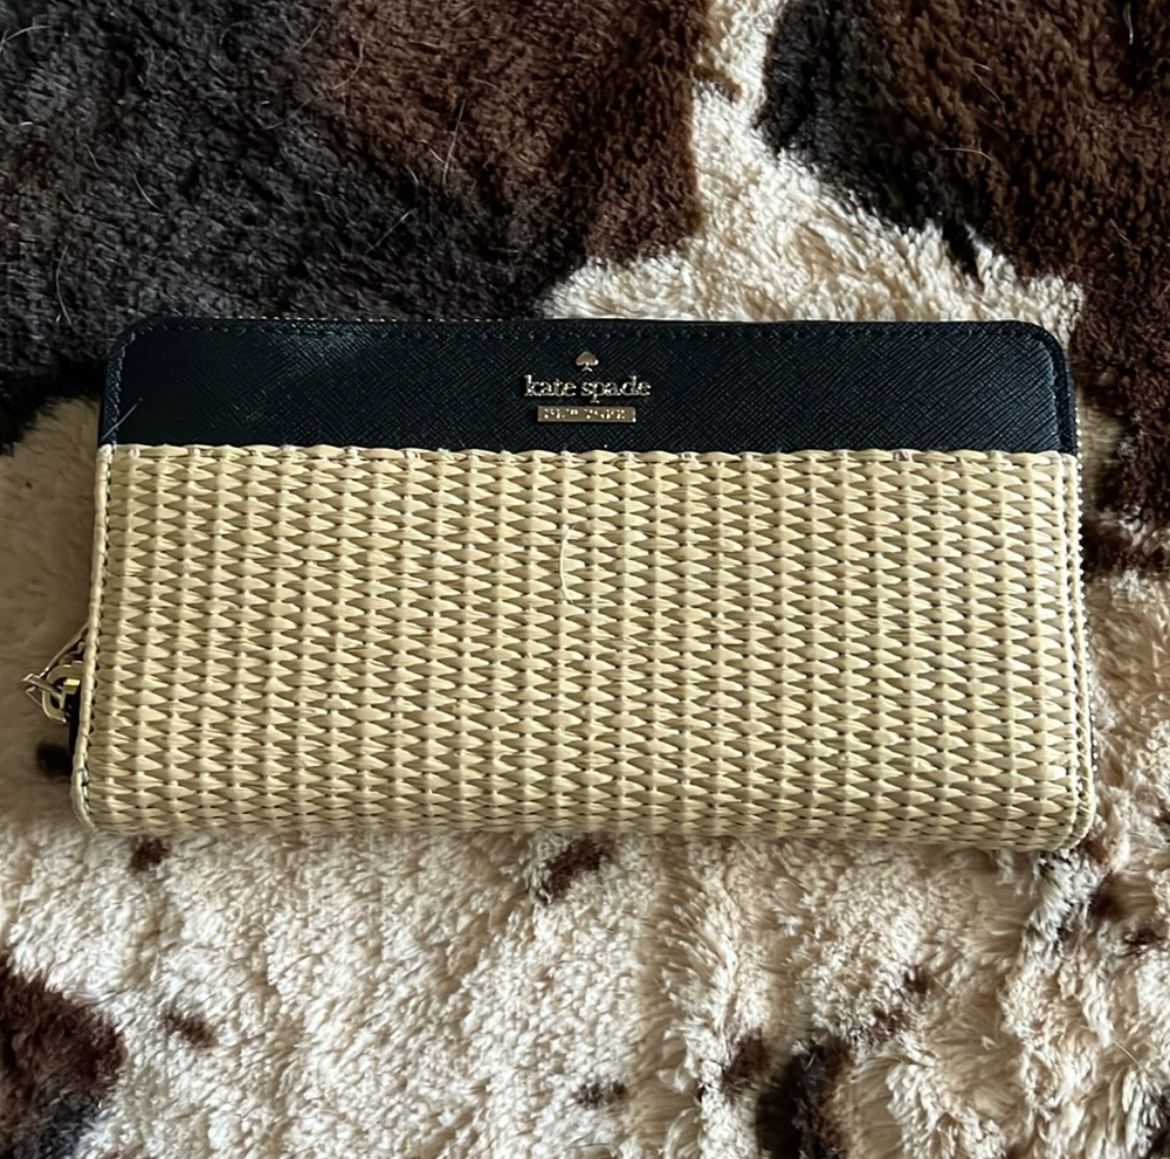 Black and weaved Kate Spade clutch